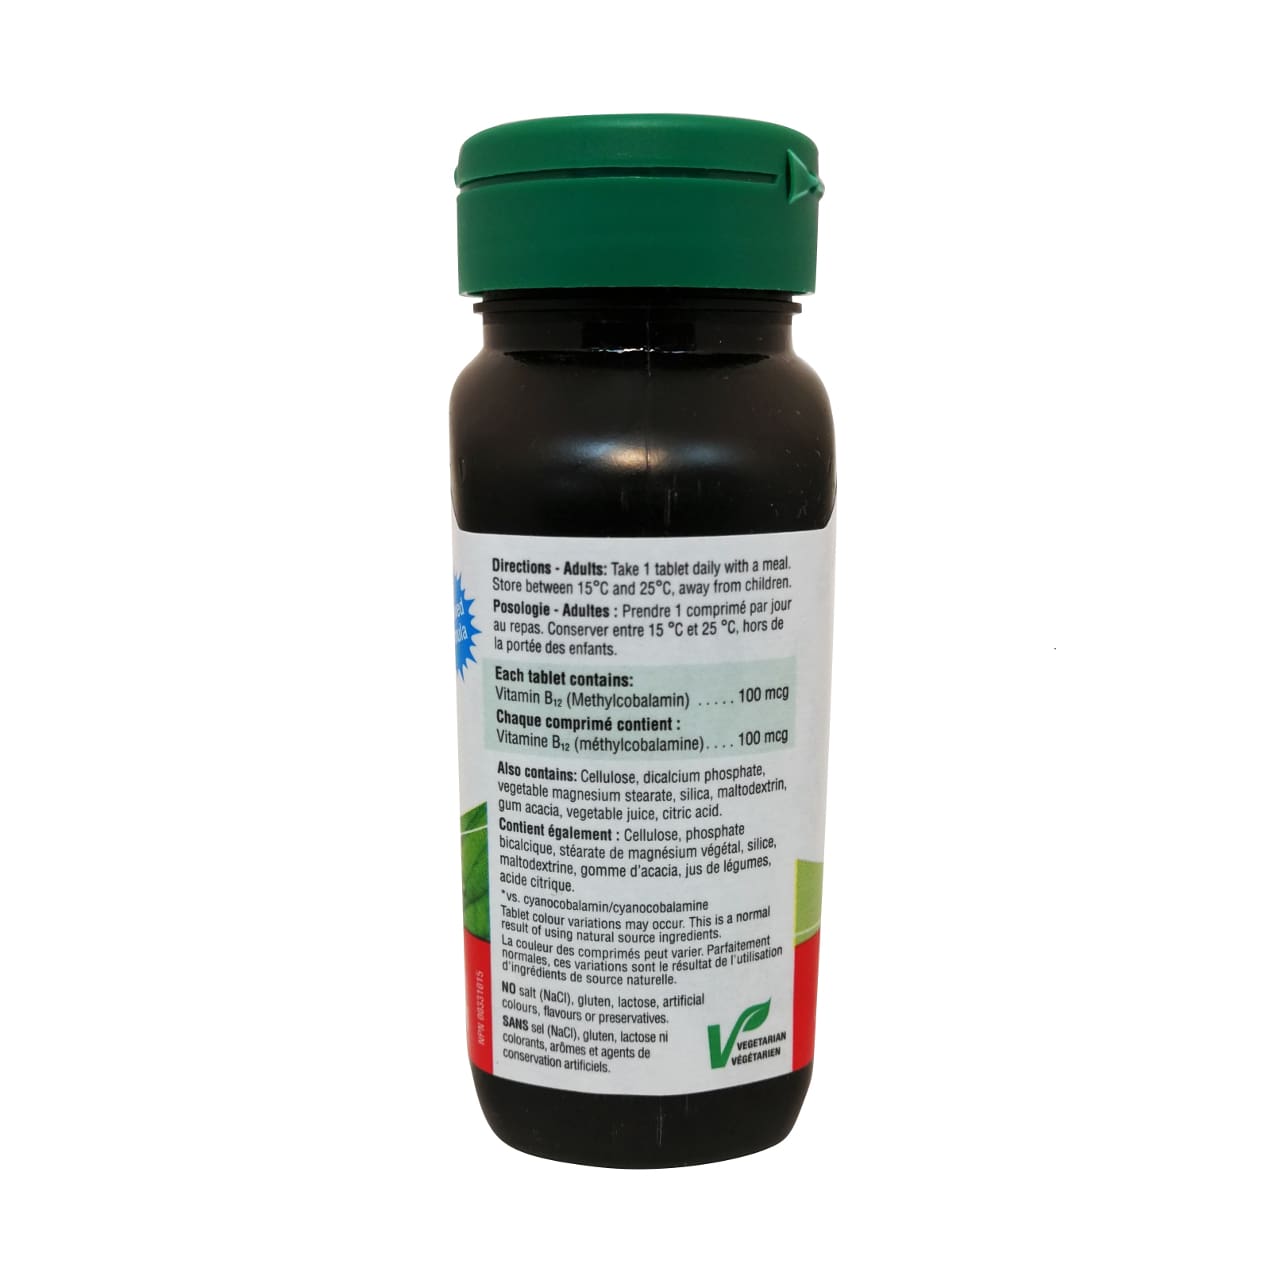 Product directions, ingredients for Jamieson B12 100mcg in English and French